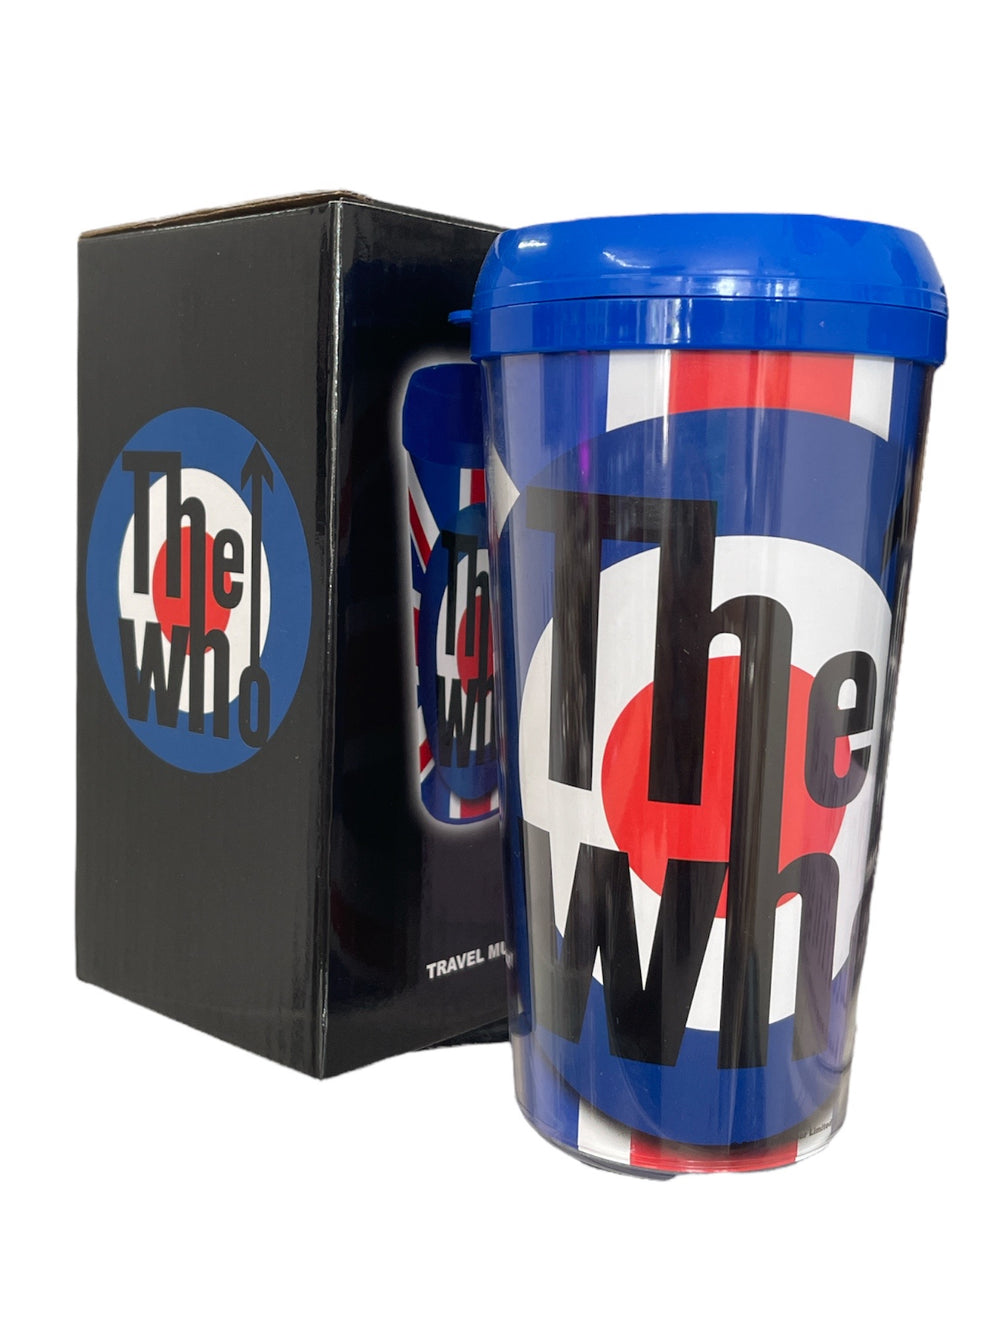 The Who Target Plastic Travel Mug Boxed Official Brand New